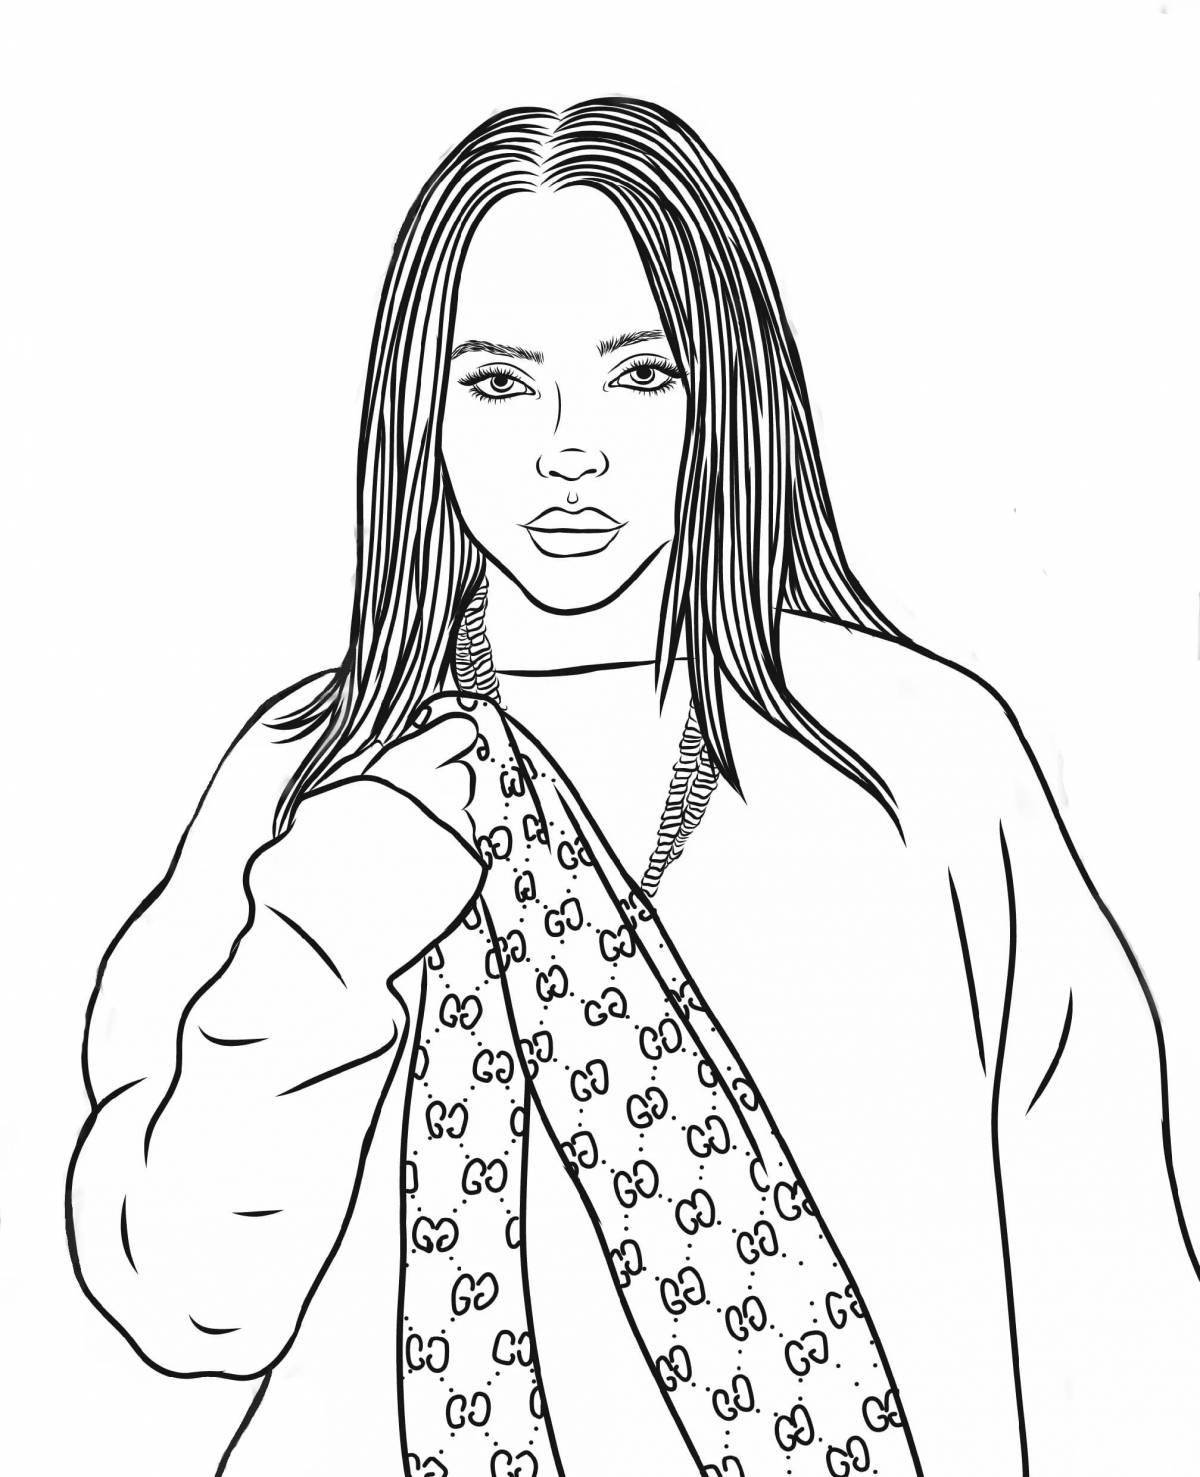 Mia smartly coloring page